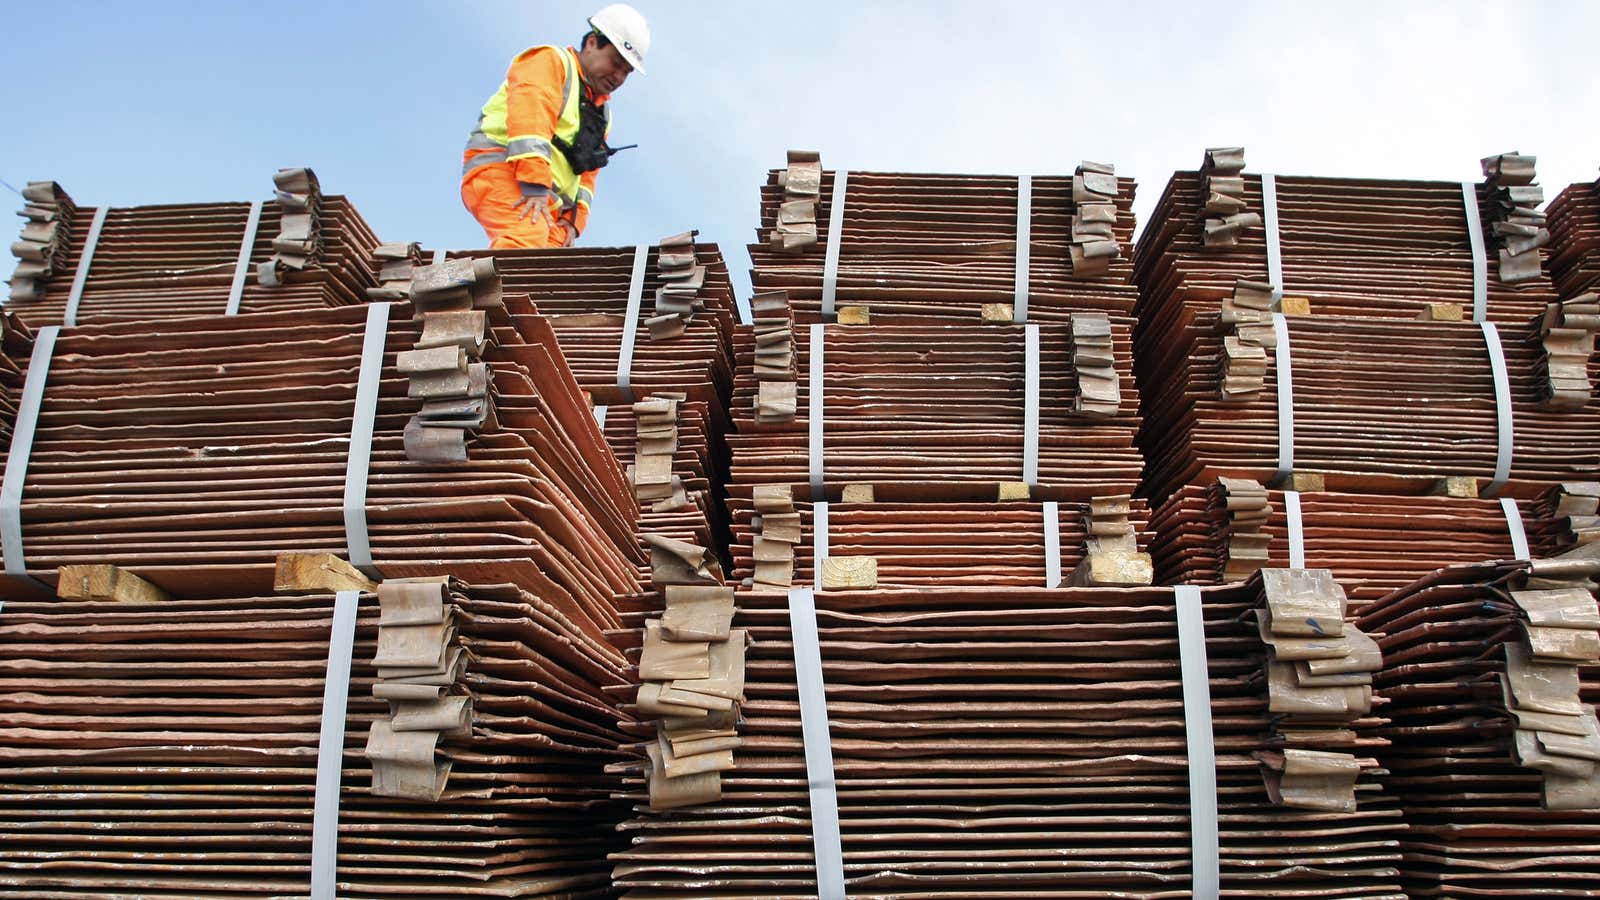 Who will want all that copper when the Chinese carry trade collapses?